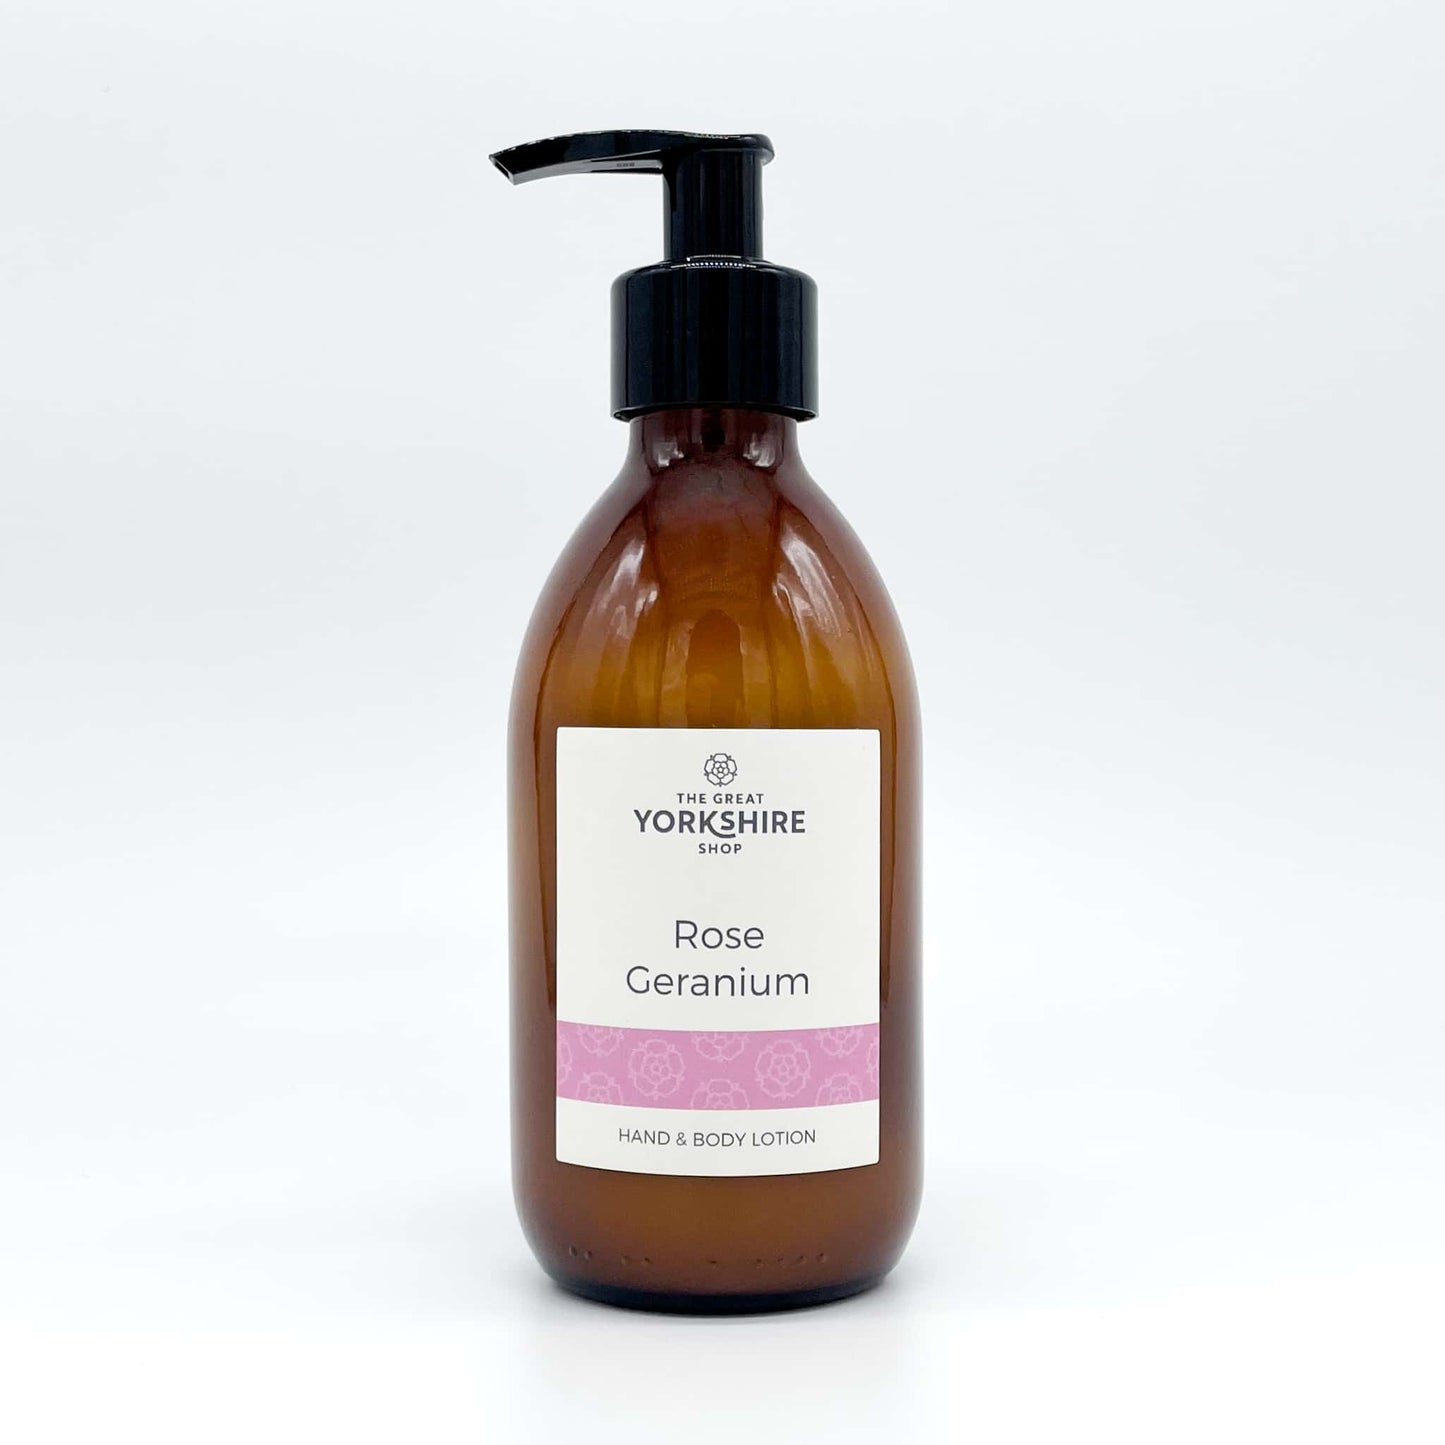 Rose Geranium Hand & Body Lotion - The Great Yorkshire Shop